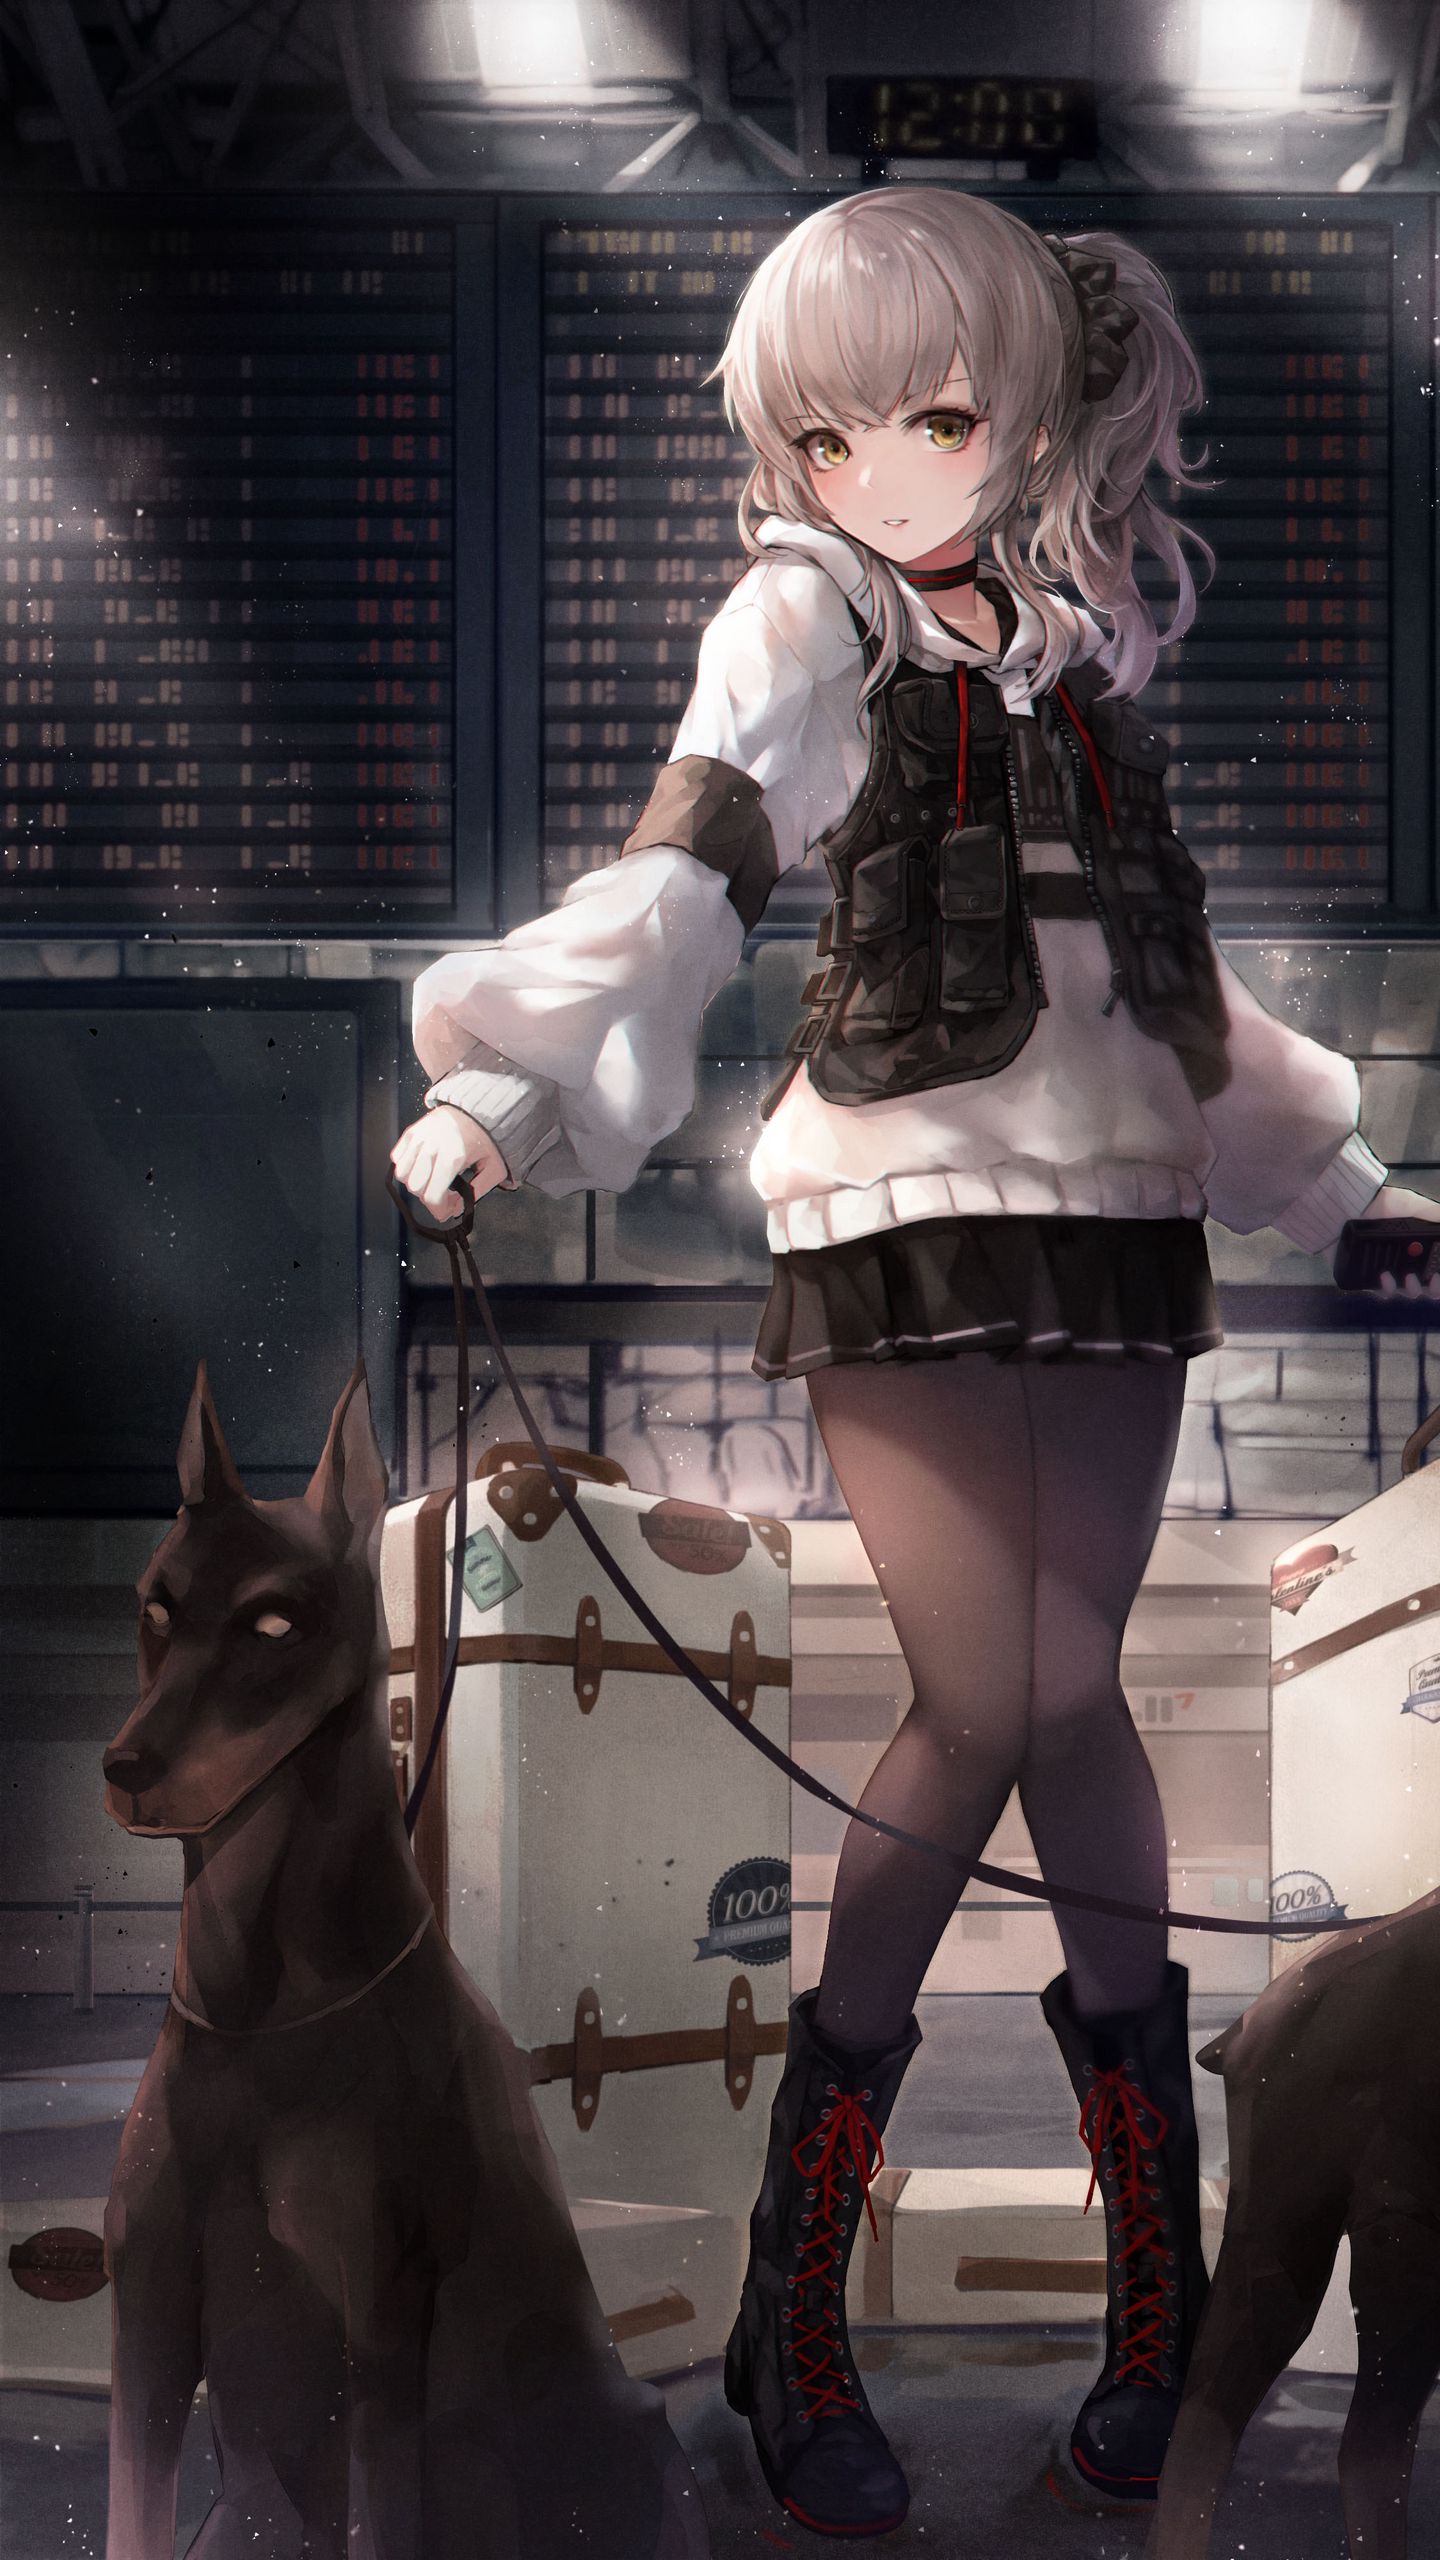 Download wallpaper 1440x2560 girl, dog, airport, security, anime qhd samsung galaxy s s edge, note, lg g4 HD background